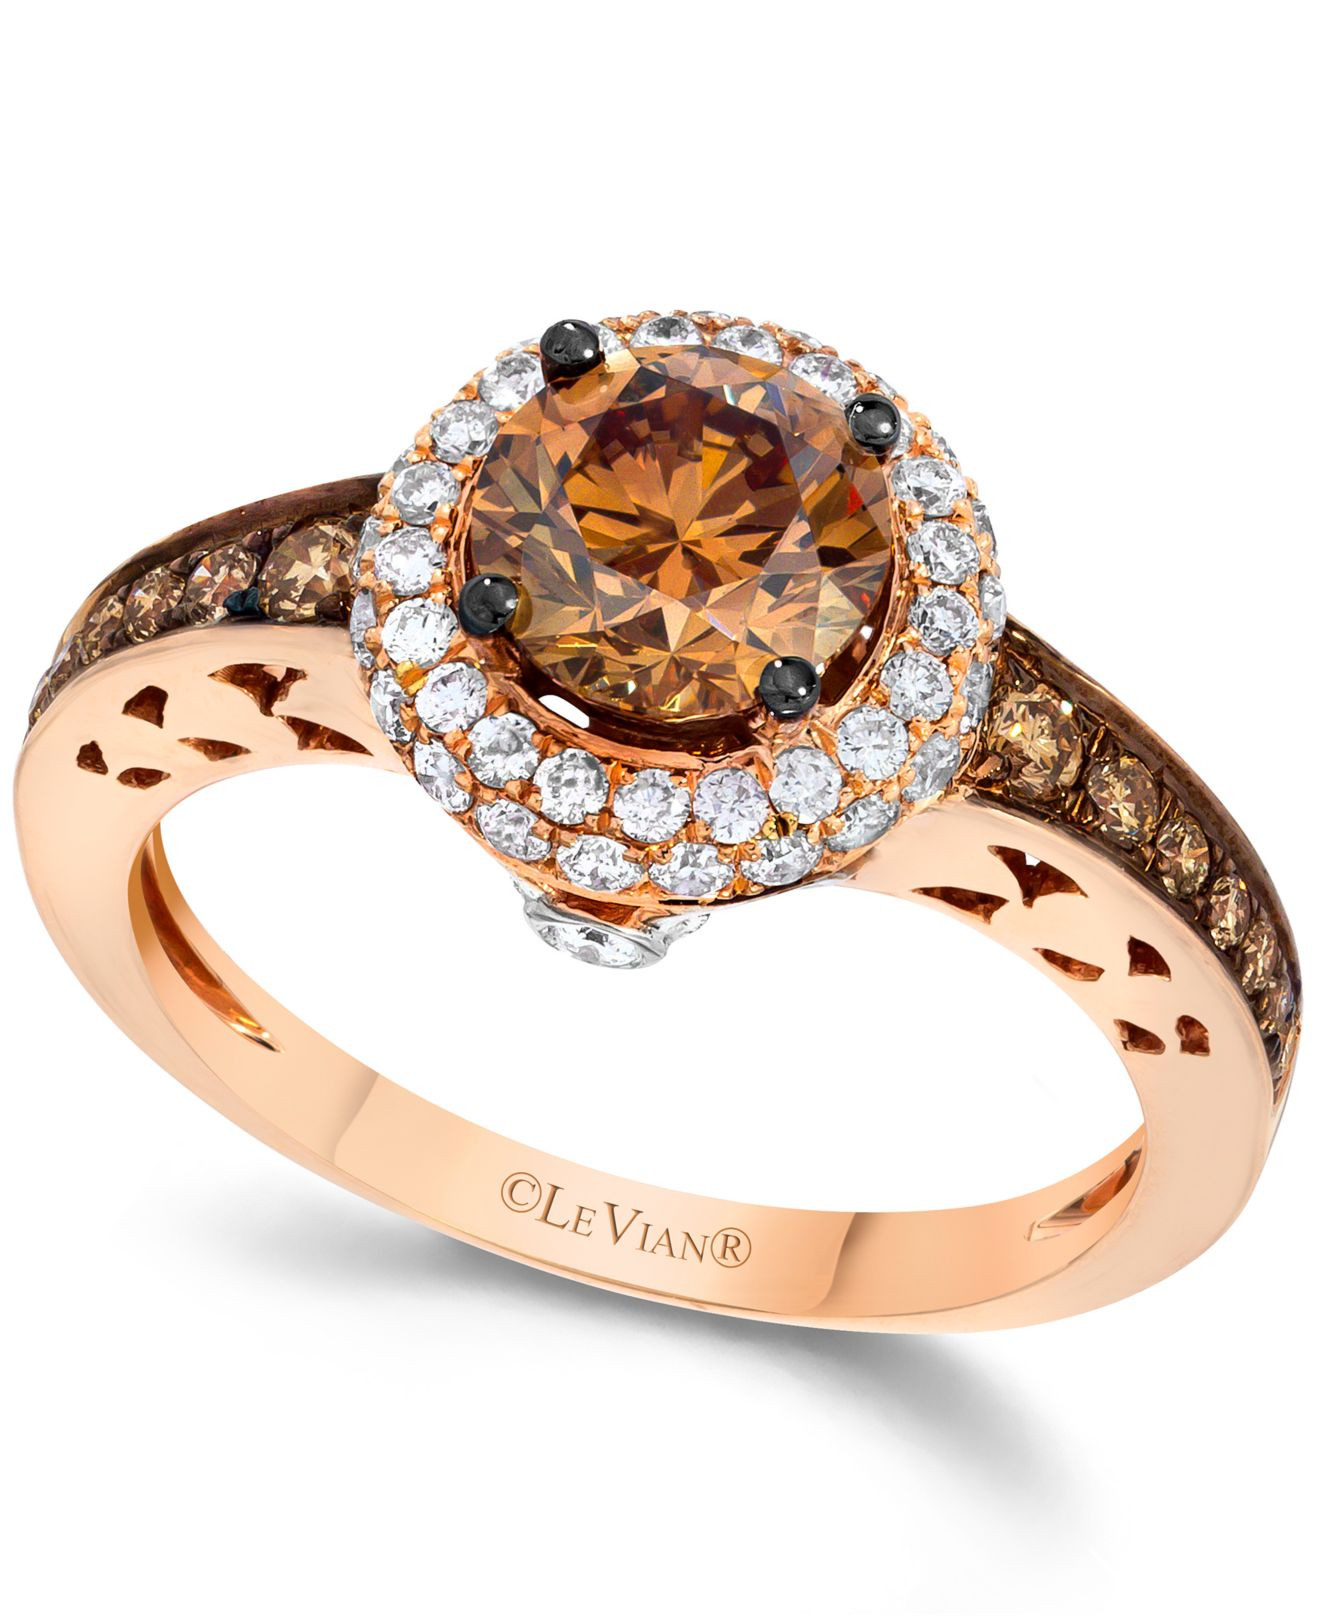 Chocolate Diamond Wedding Rings
 Le vian Chocolate And White Diamond Engagement Ring In 14k